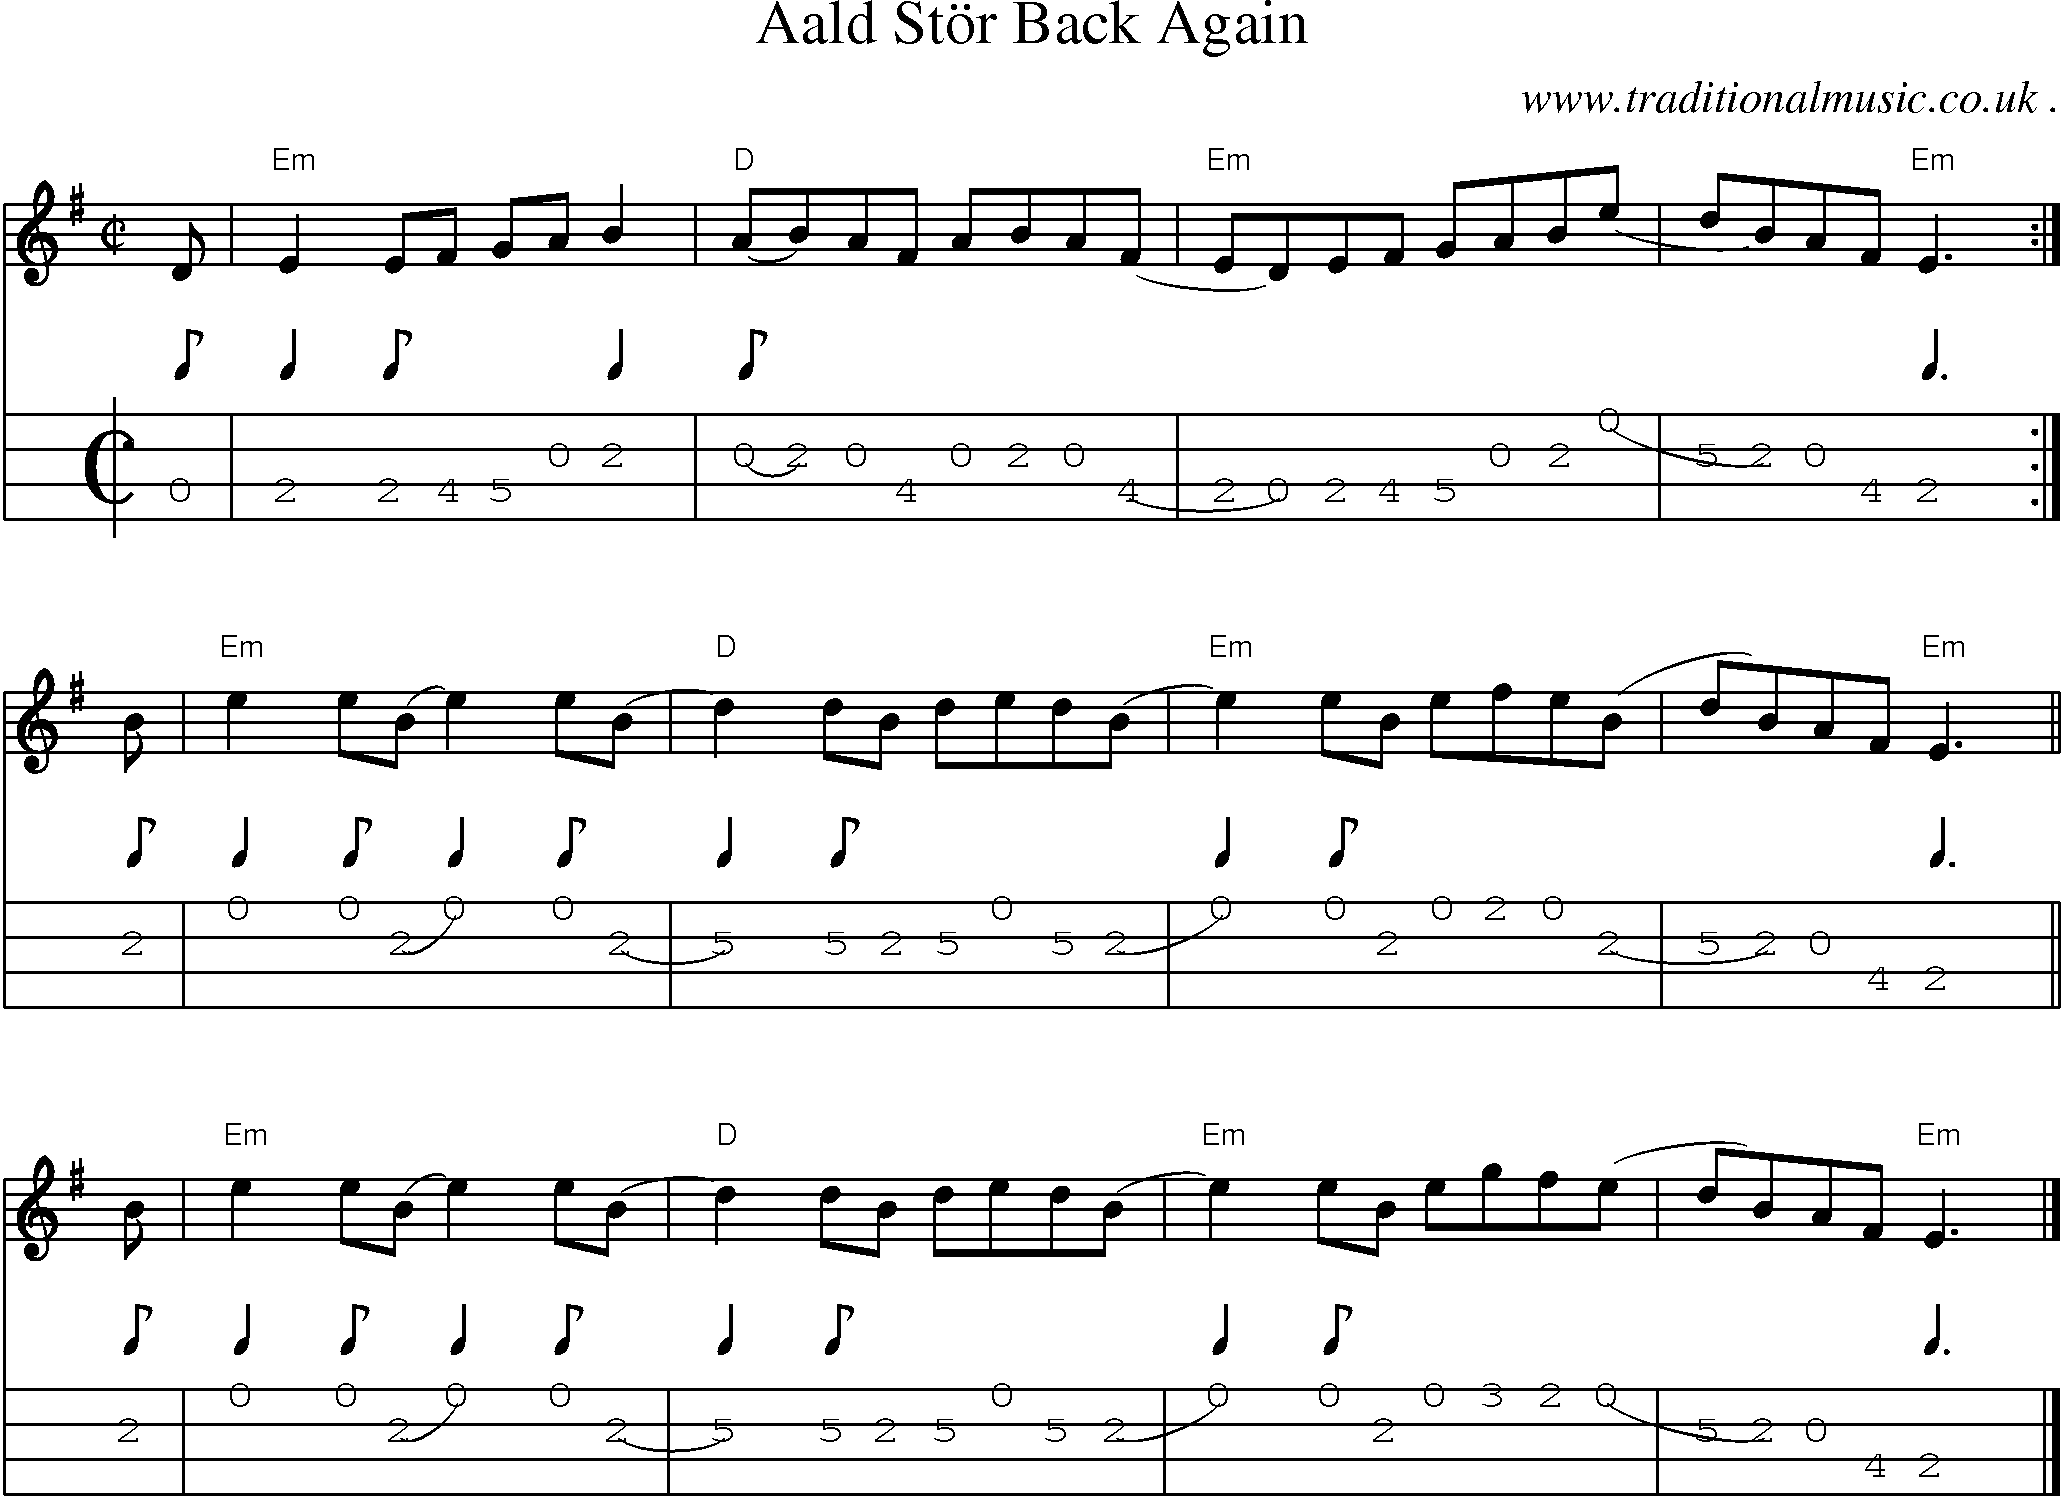 Sheet-music  score, Chords and Mandolin Tabs for Aald Stor Back Again